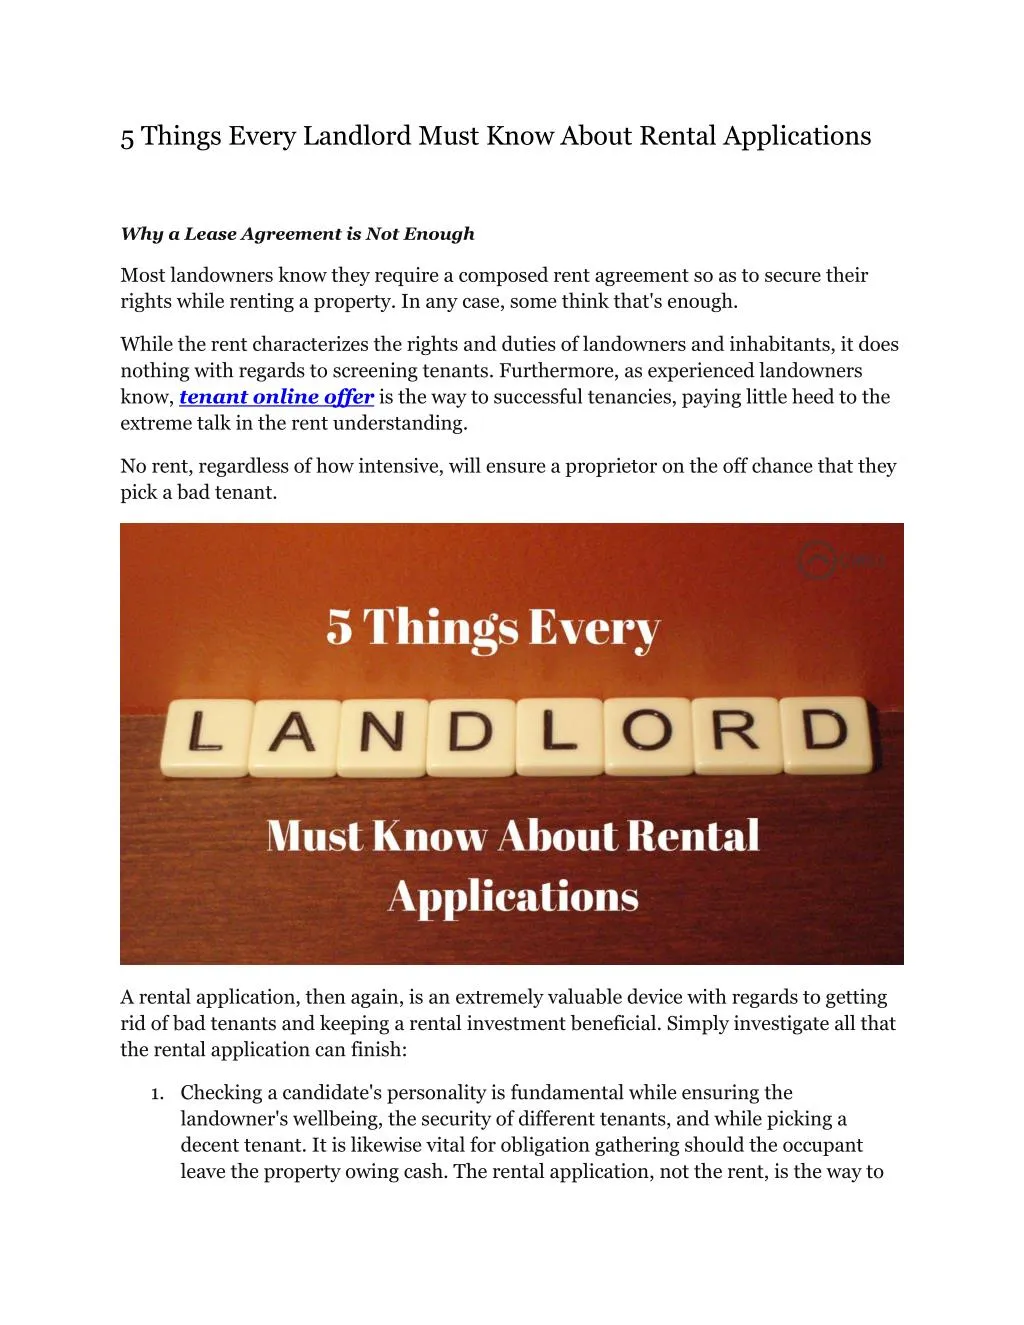 5 things every landlord must know about rental